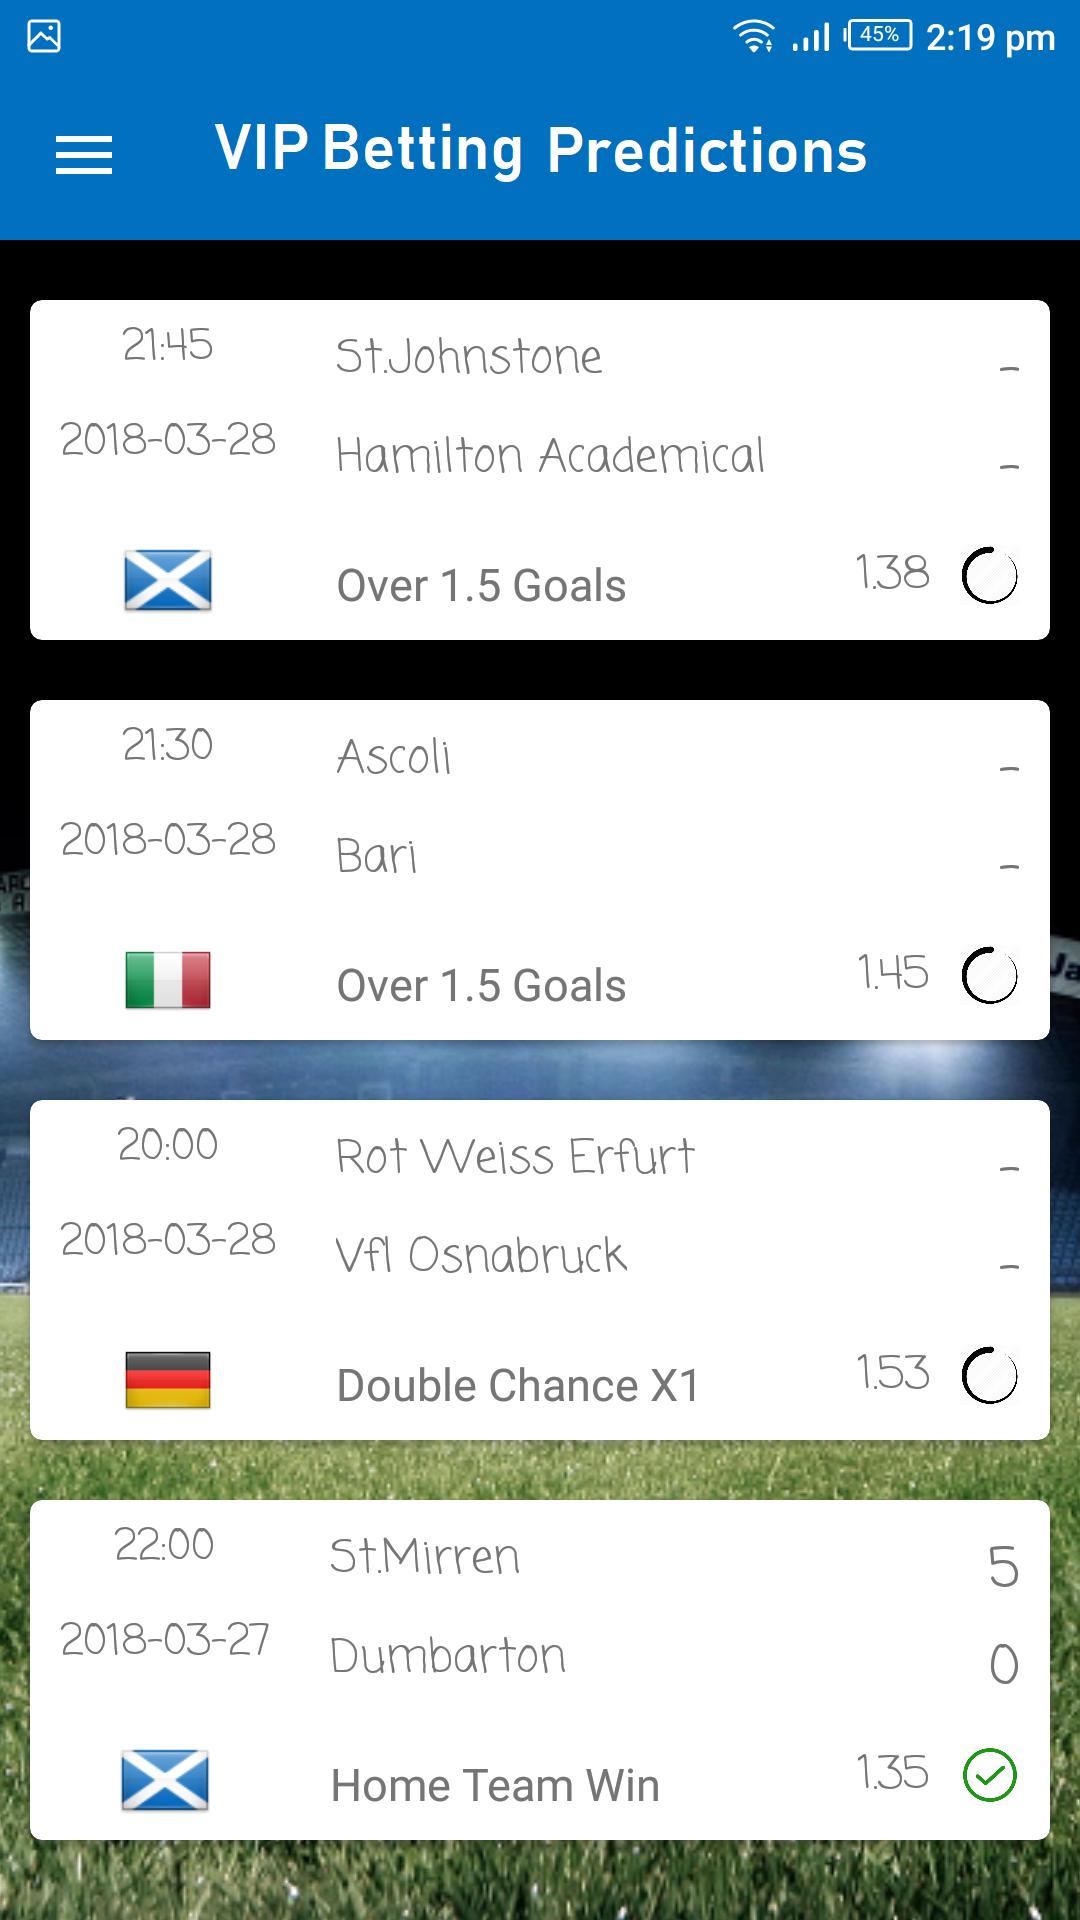 VIP Betting Predictions for Android - APK Download